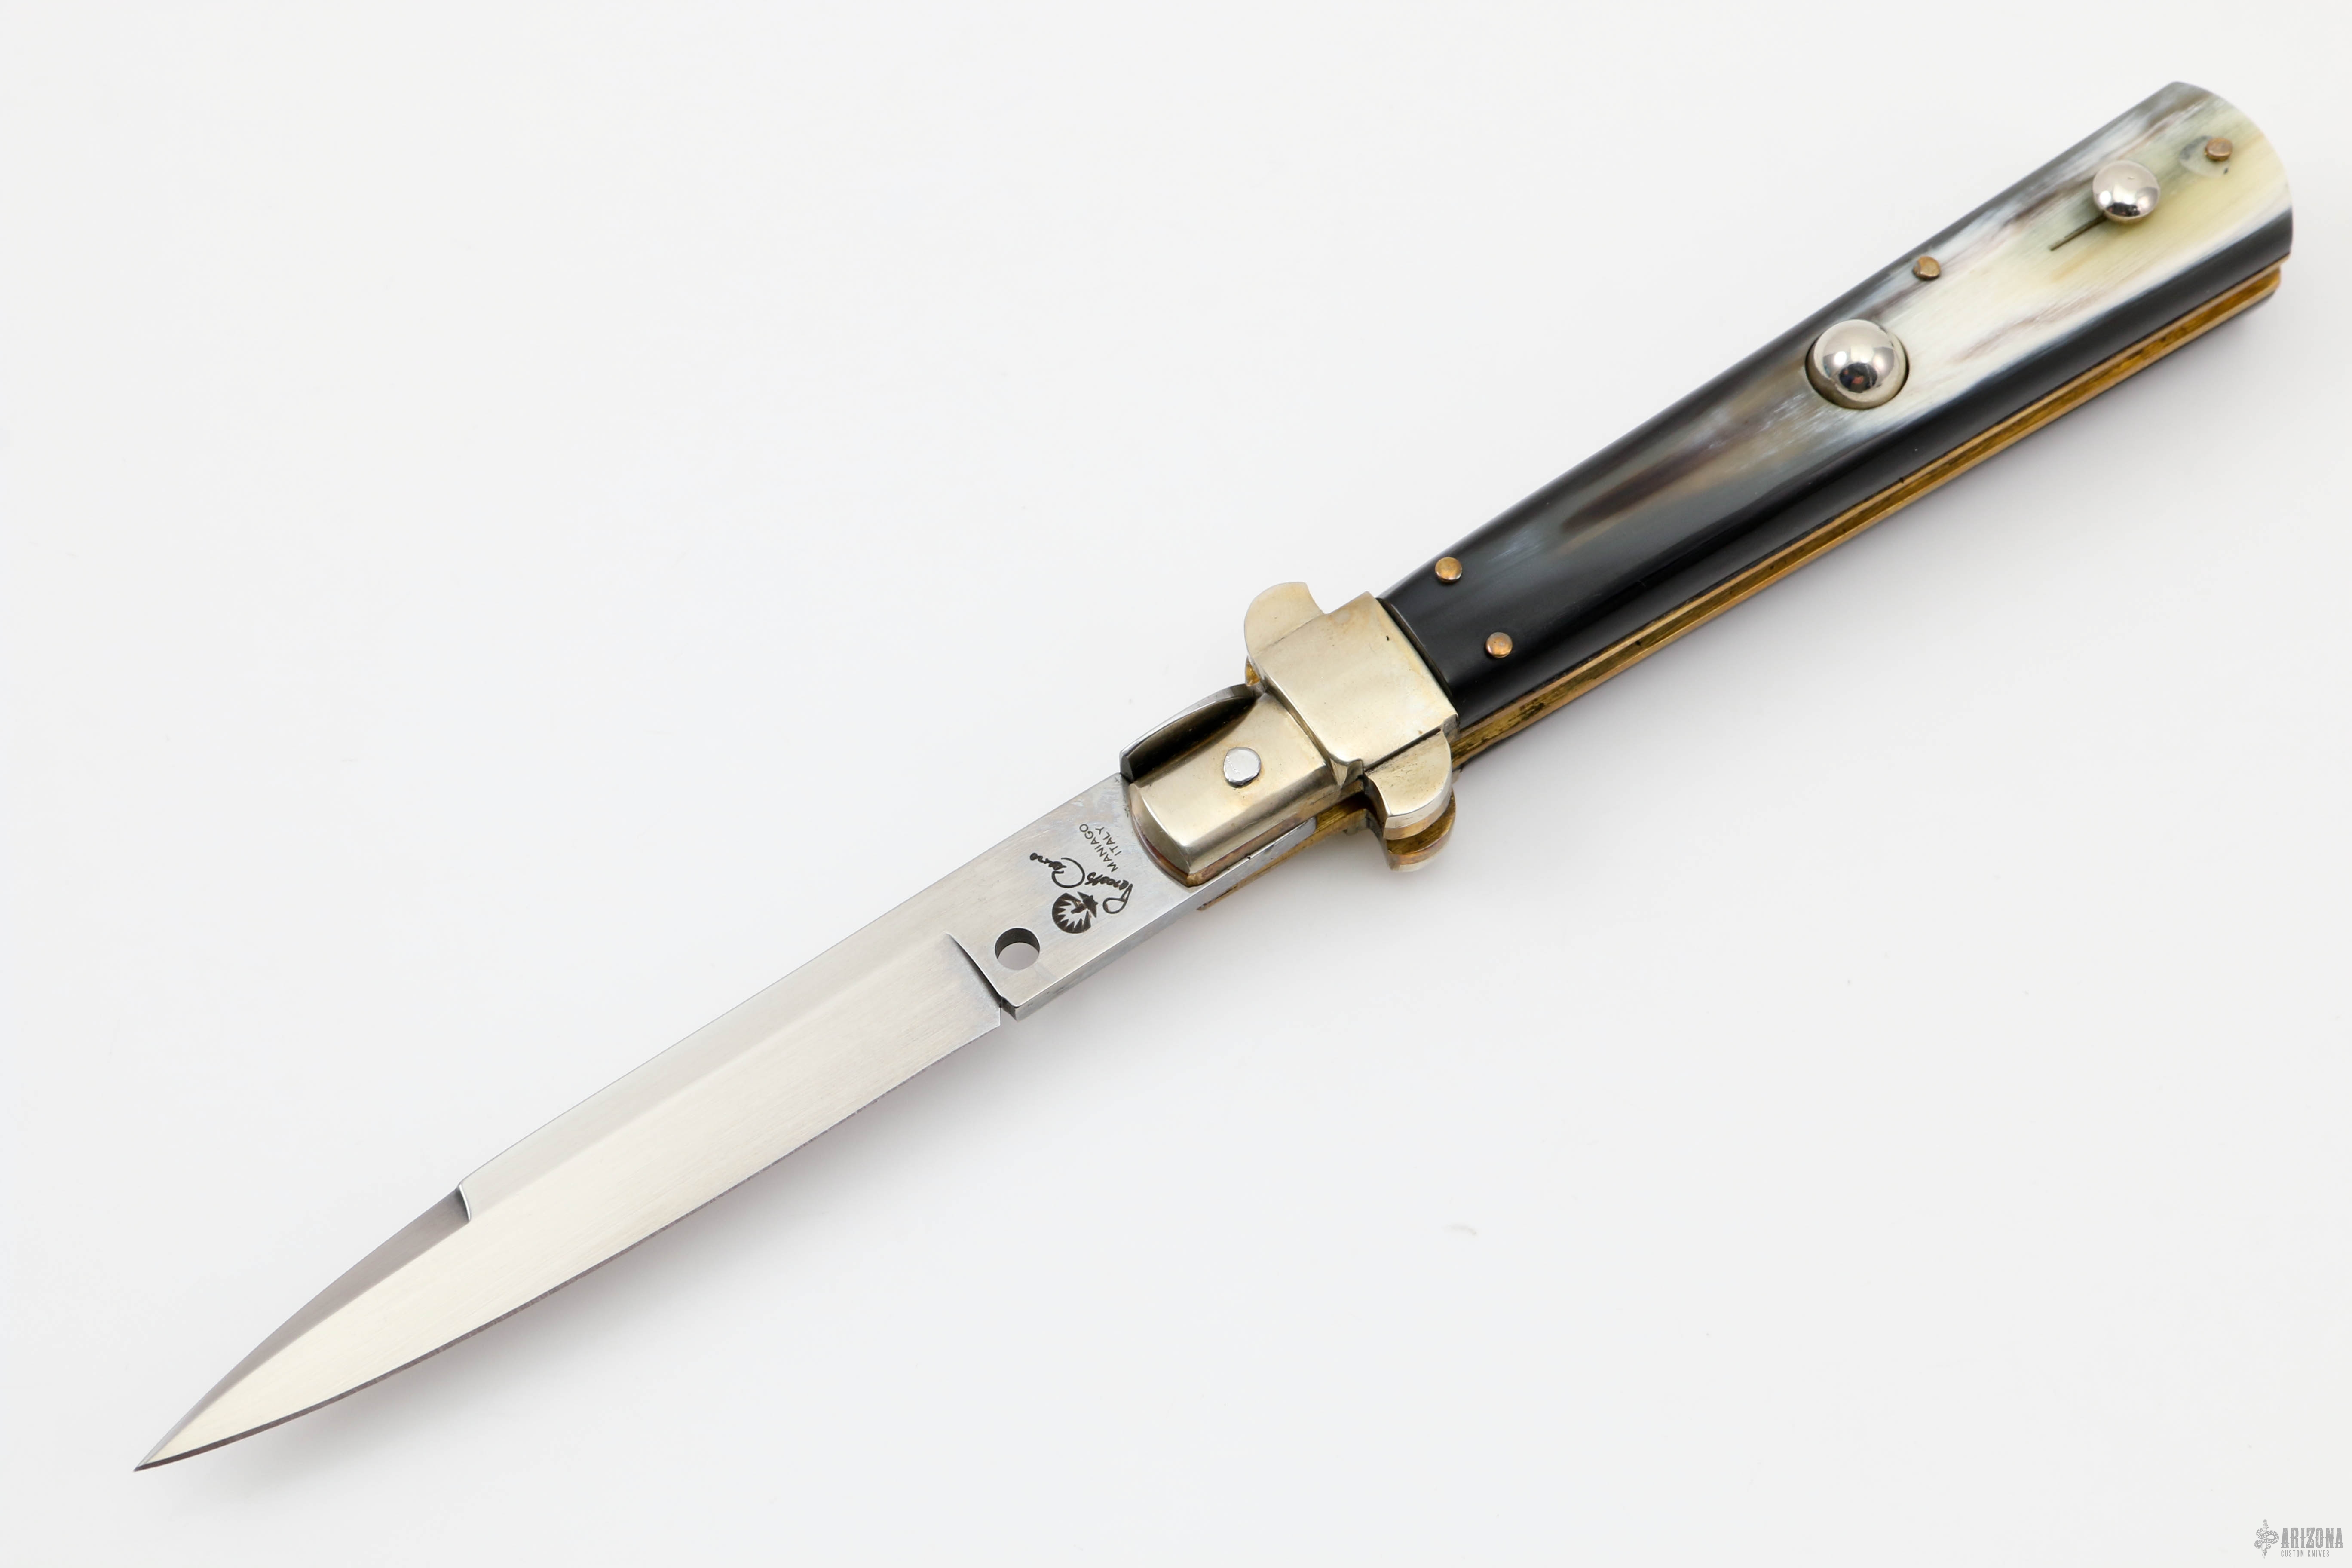 Draw Knife with Straight Blade - Codega Made in Italy